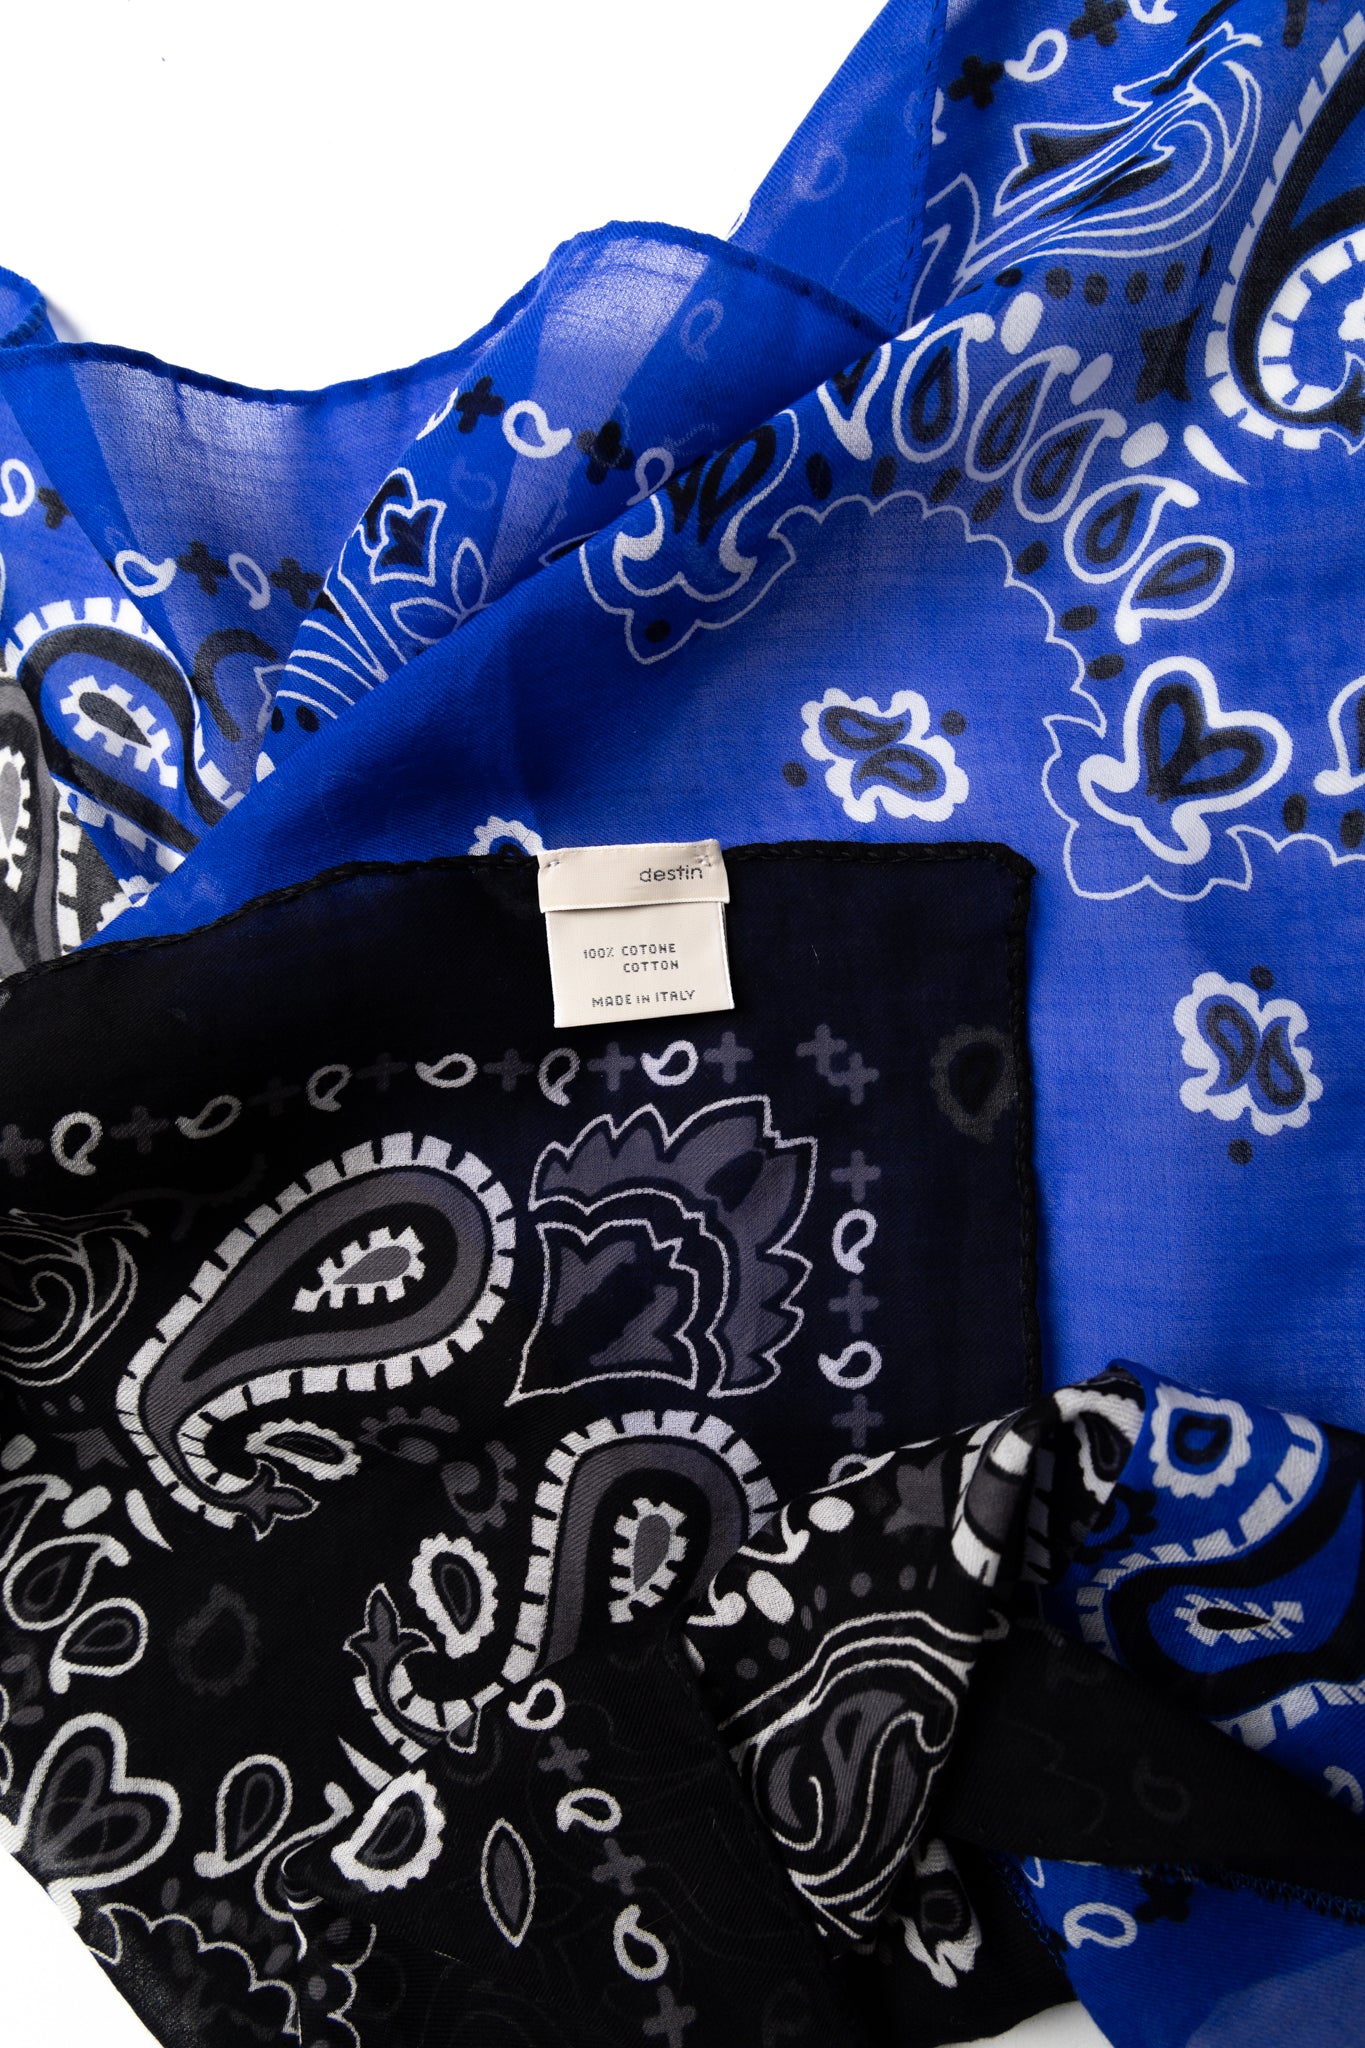 Destin Italian made Bandana. Color: Black x Blue 2 tone Extra fine cotton Light and soft touch 100% cotton Made in Italy Size: 23.5" x 23.5". Use as multipurpose scarf or bandana wrap. Unisex.